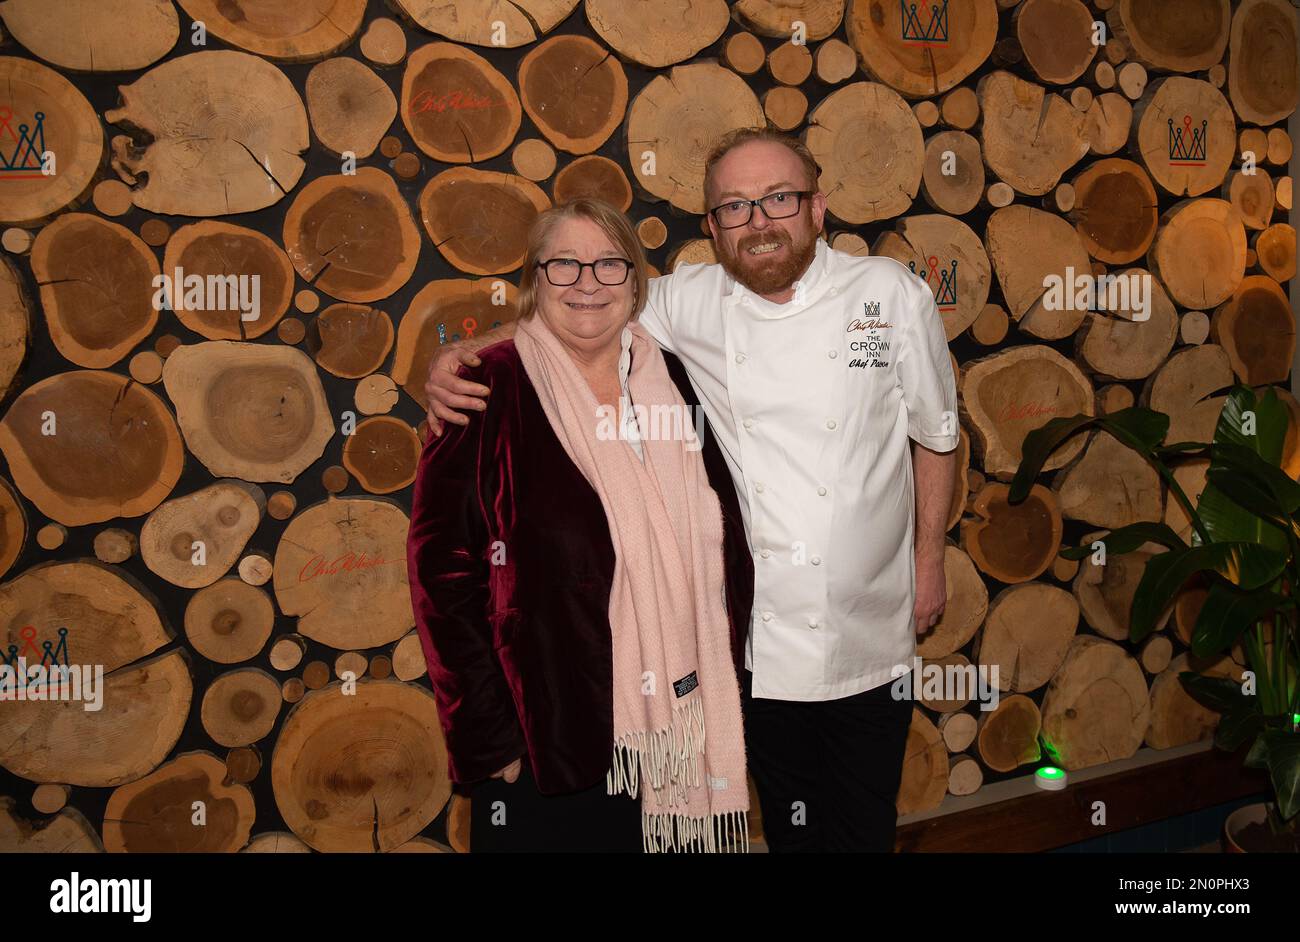 Farnham Royal, UK. 2nd February, 2023. Celebrity Chef Rosemary Shrager and Celebrity Chef Chris Wheeler at the pre opening event at the Crown Inn. Chris Wheeler who was the Executive Chef at the former Humphry's Restaurant at Stoke Park for almost 20 years has now opened a new restaurant called Chris Wheeler at the Crown Inn together with business partner and pub owner Russell Allen. The restaurant at the Crown Inn in Farnham Royal, Slough opened for business on Saturday 4th February 2023. Credit: Maureen McLean/Alamy Stock Photo